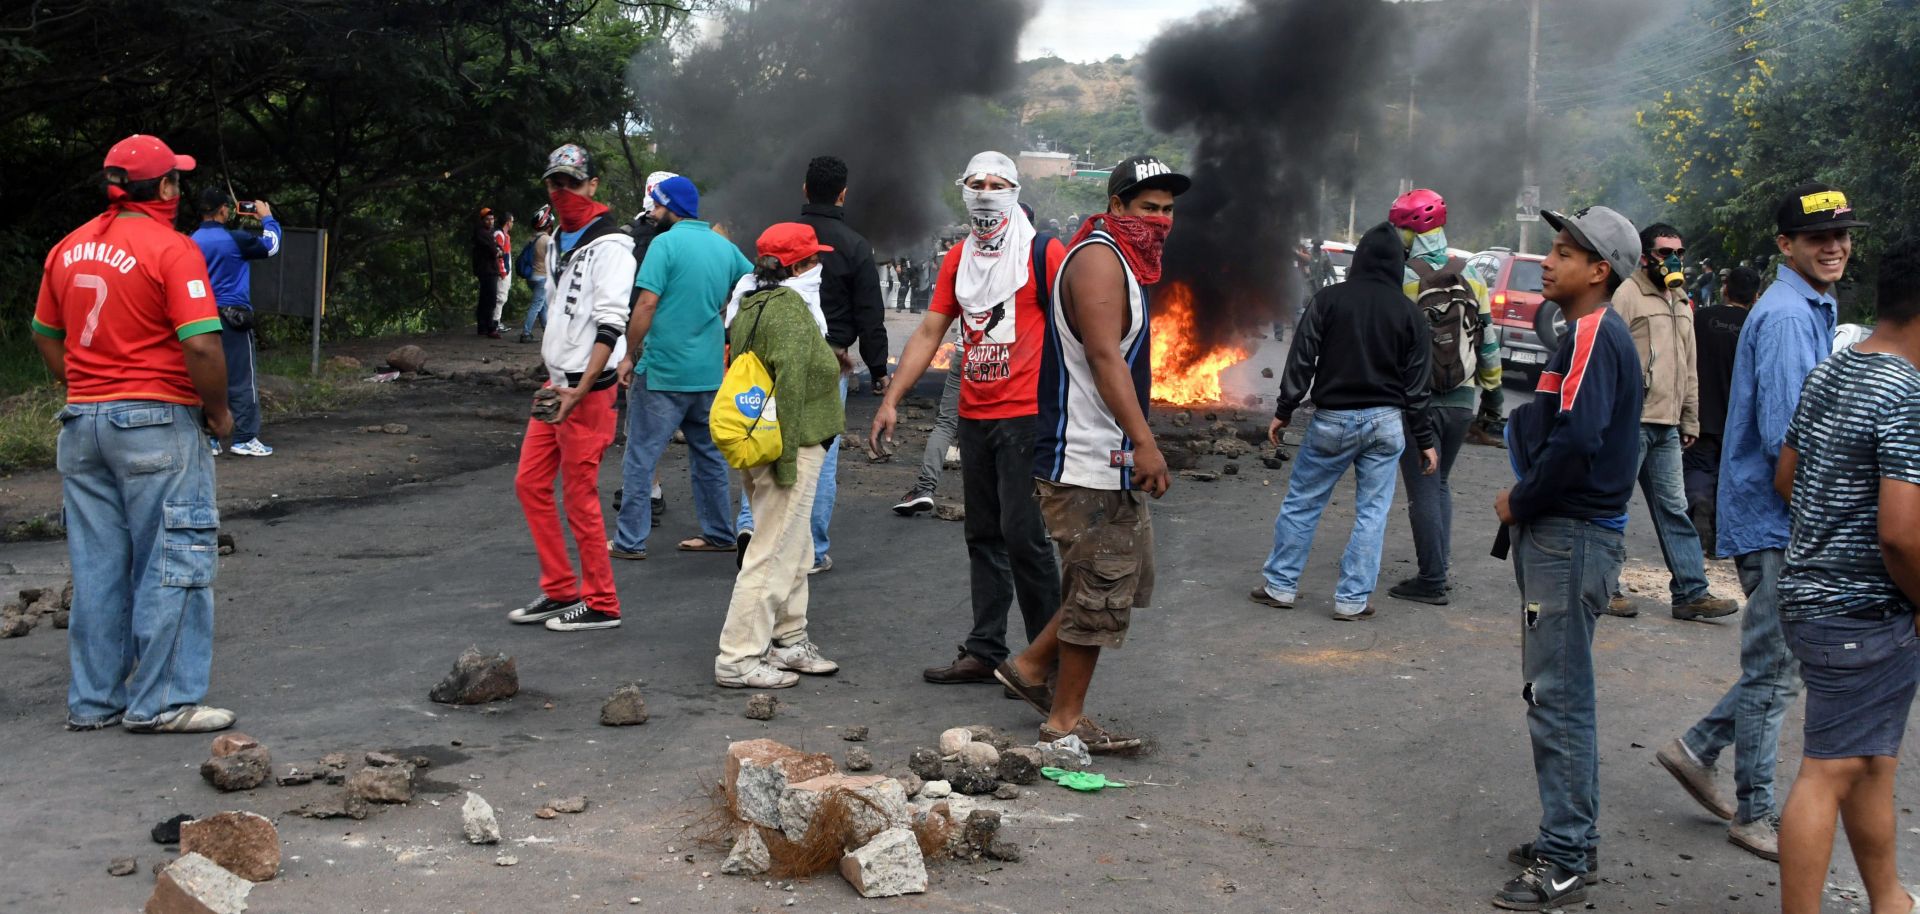 In Honduras, supporters of the opposition coalition, whose candidate narrowly lost the presidential election in December, set up a roadblock in Tegucigalpa.